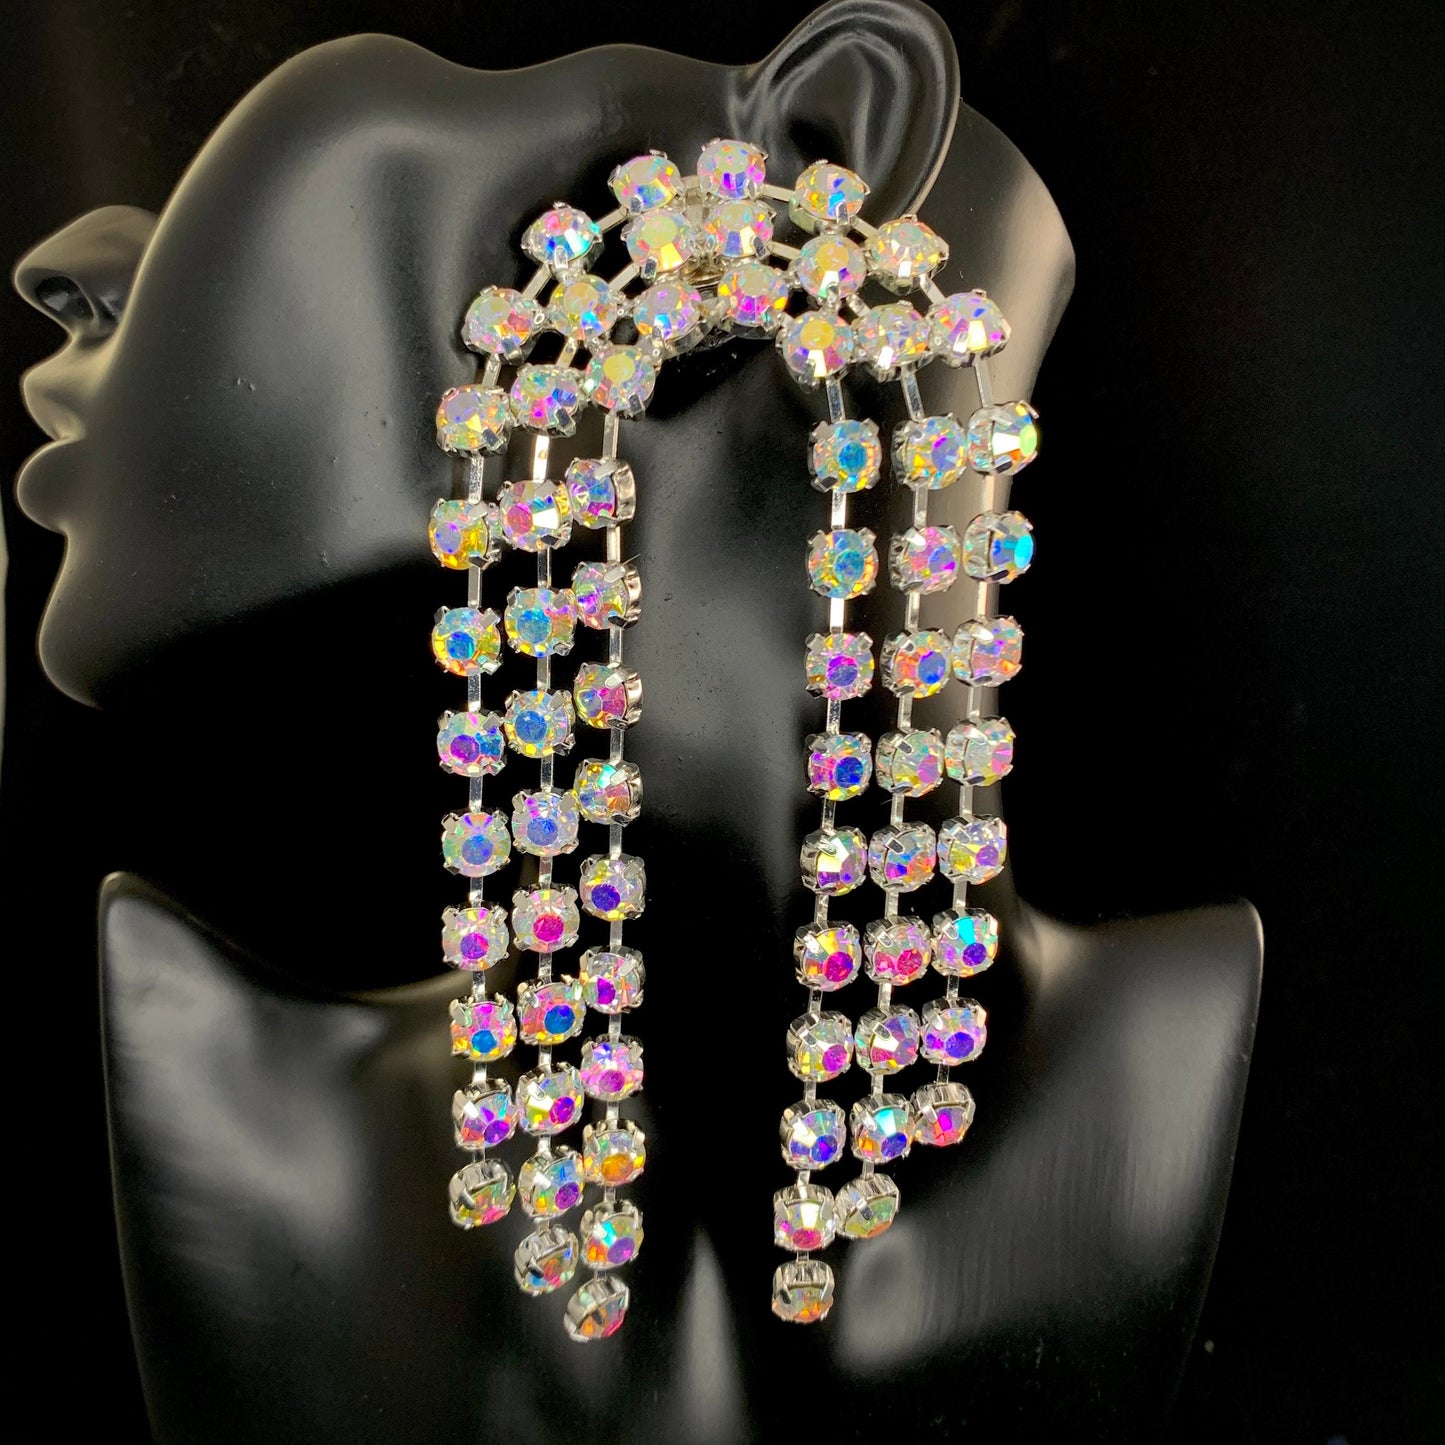 Waterfall Earrings / Sparkling Clip on or Pierced / Gift / Drag Queen Jewelry / Costume Jewellery